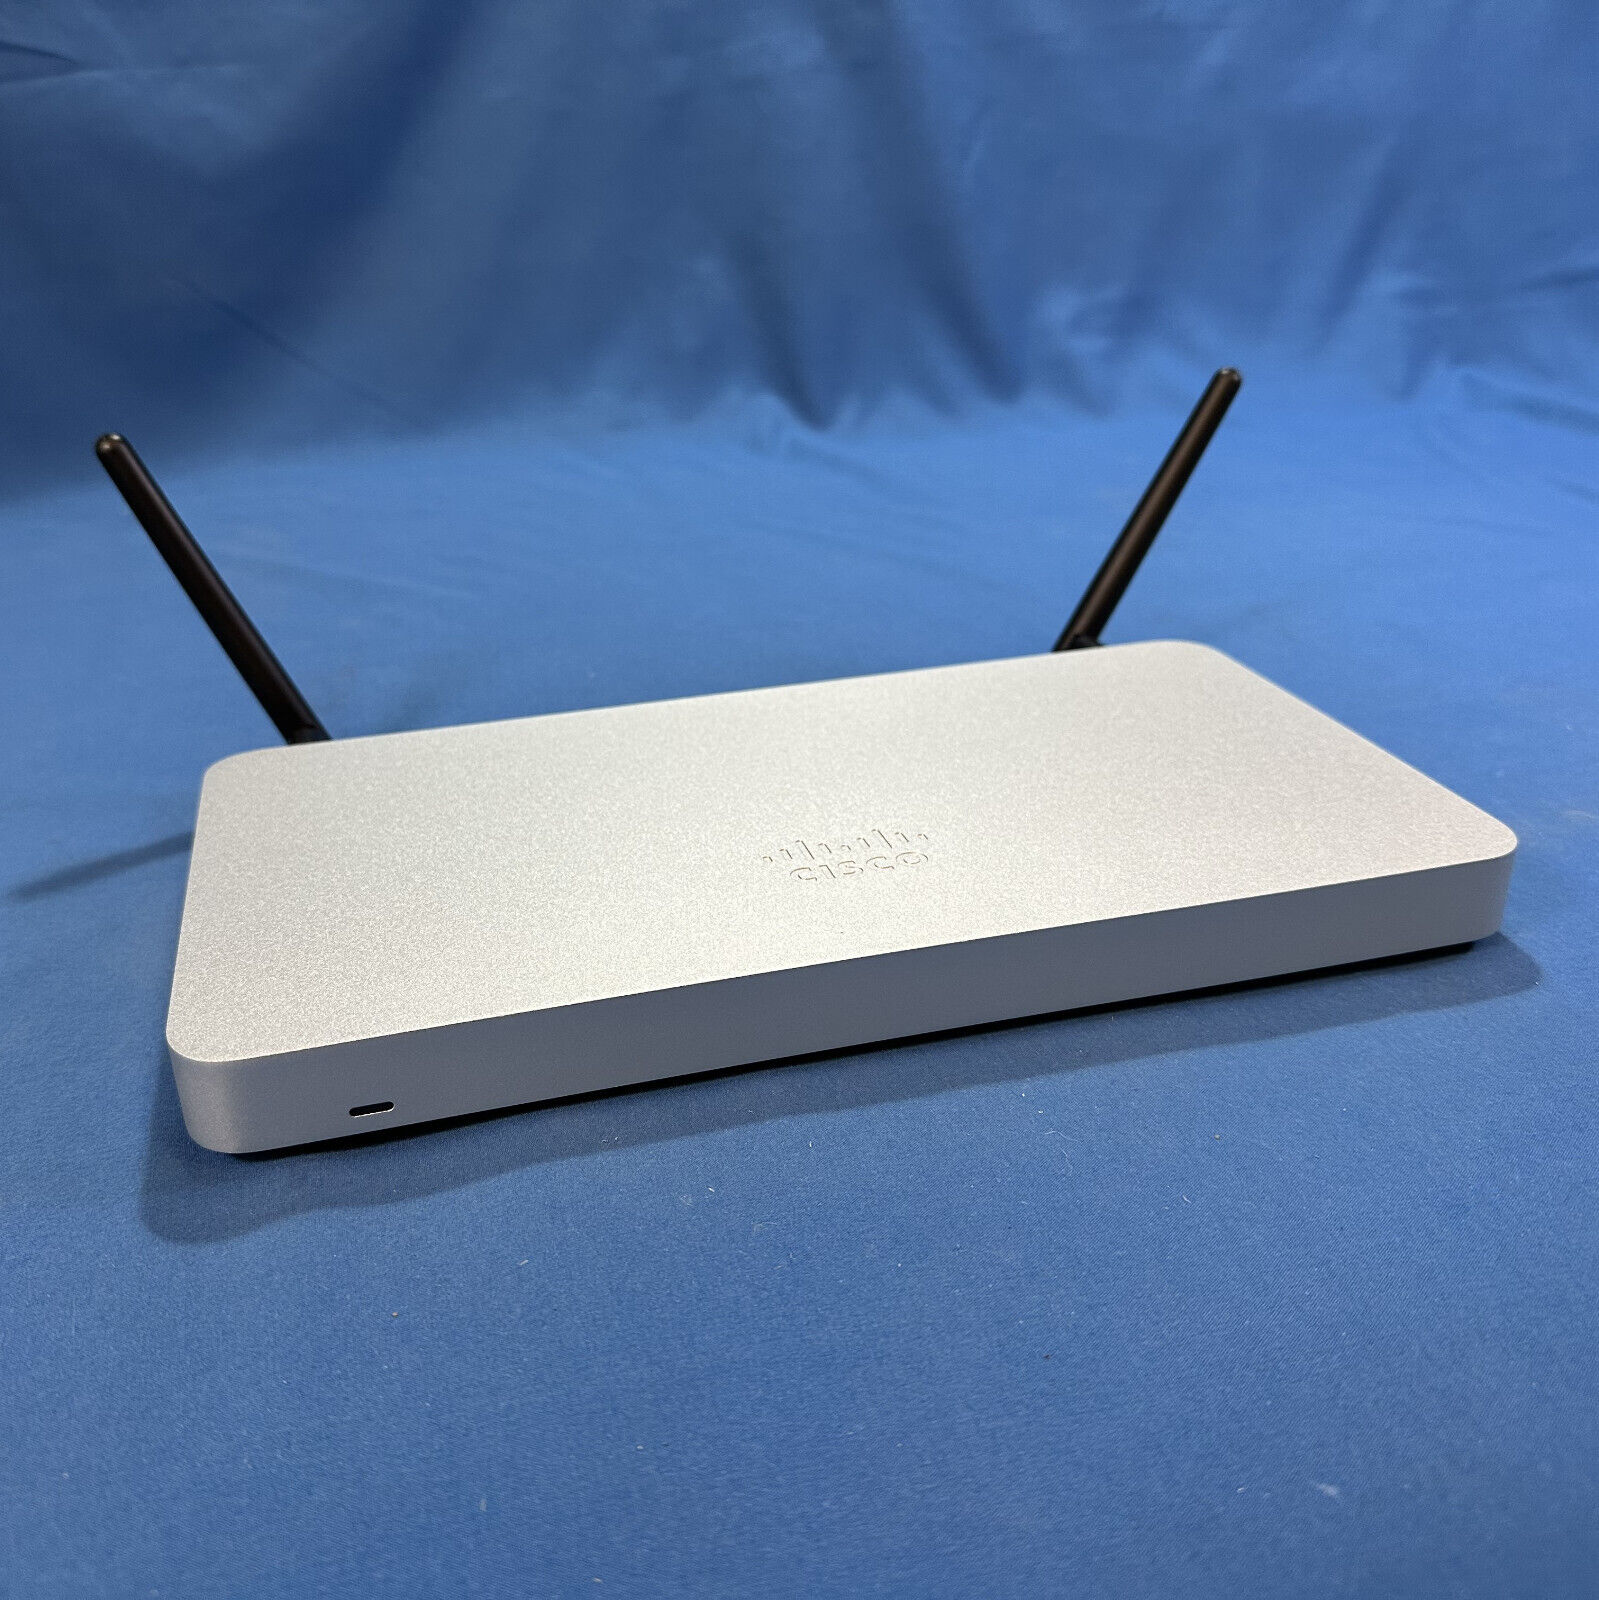 Cisco Meraki MX68W Firewall with Adapter - Unclaimed - TESTED WORKING